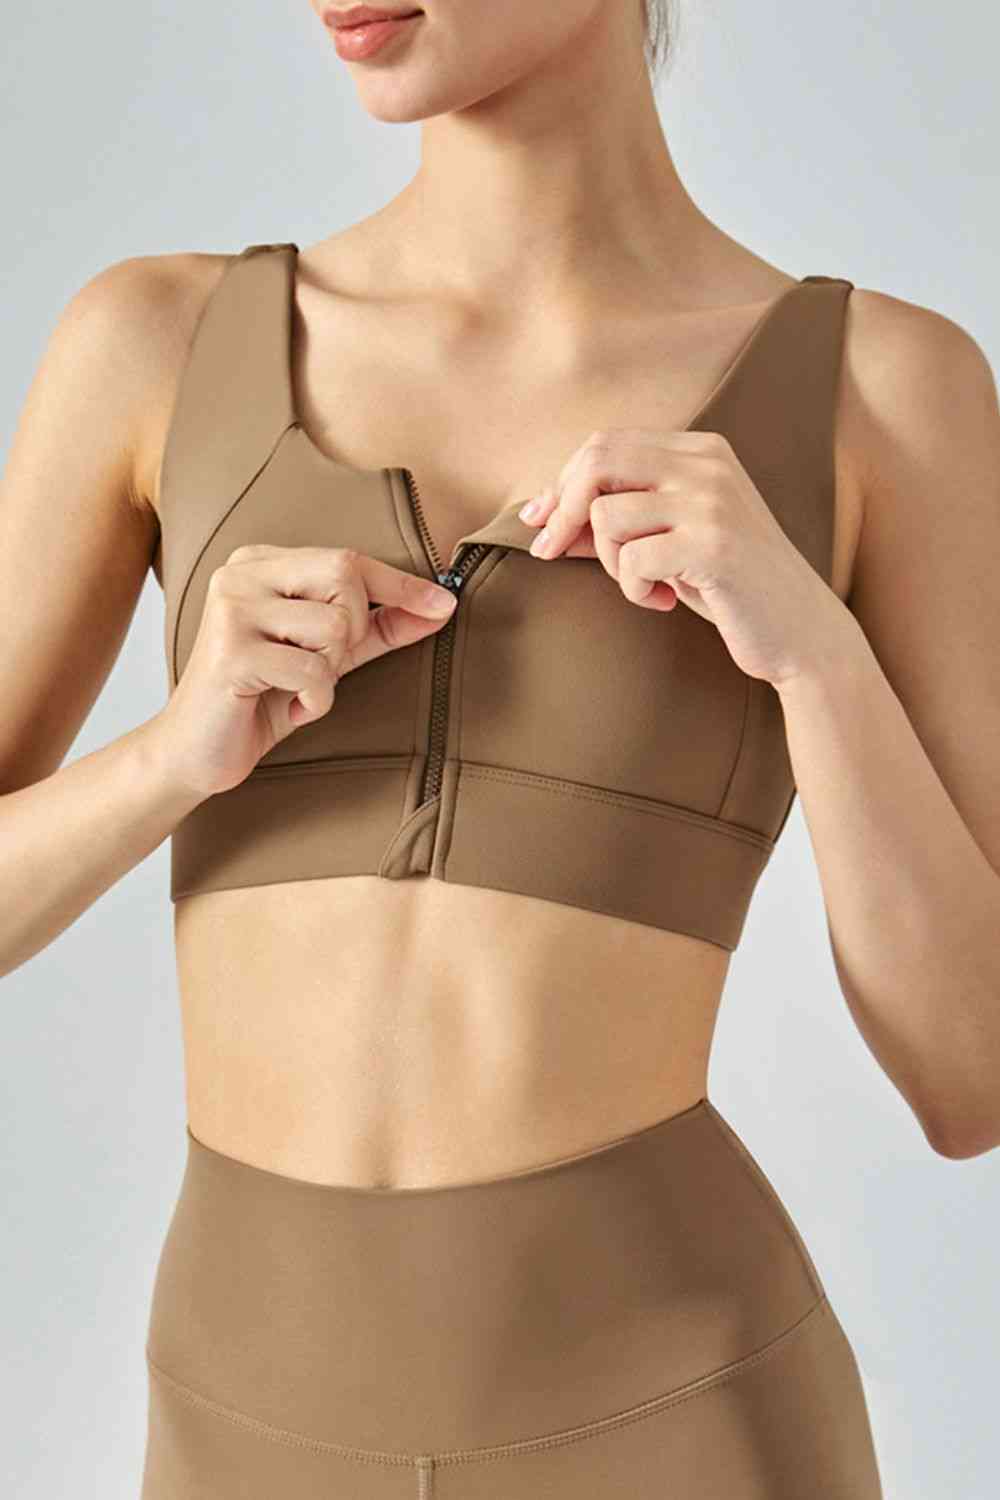 Breathable Zip-Up Sports Bra: The Energizer